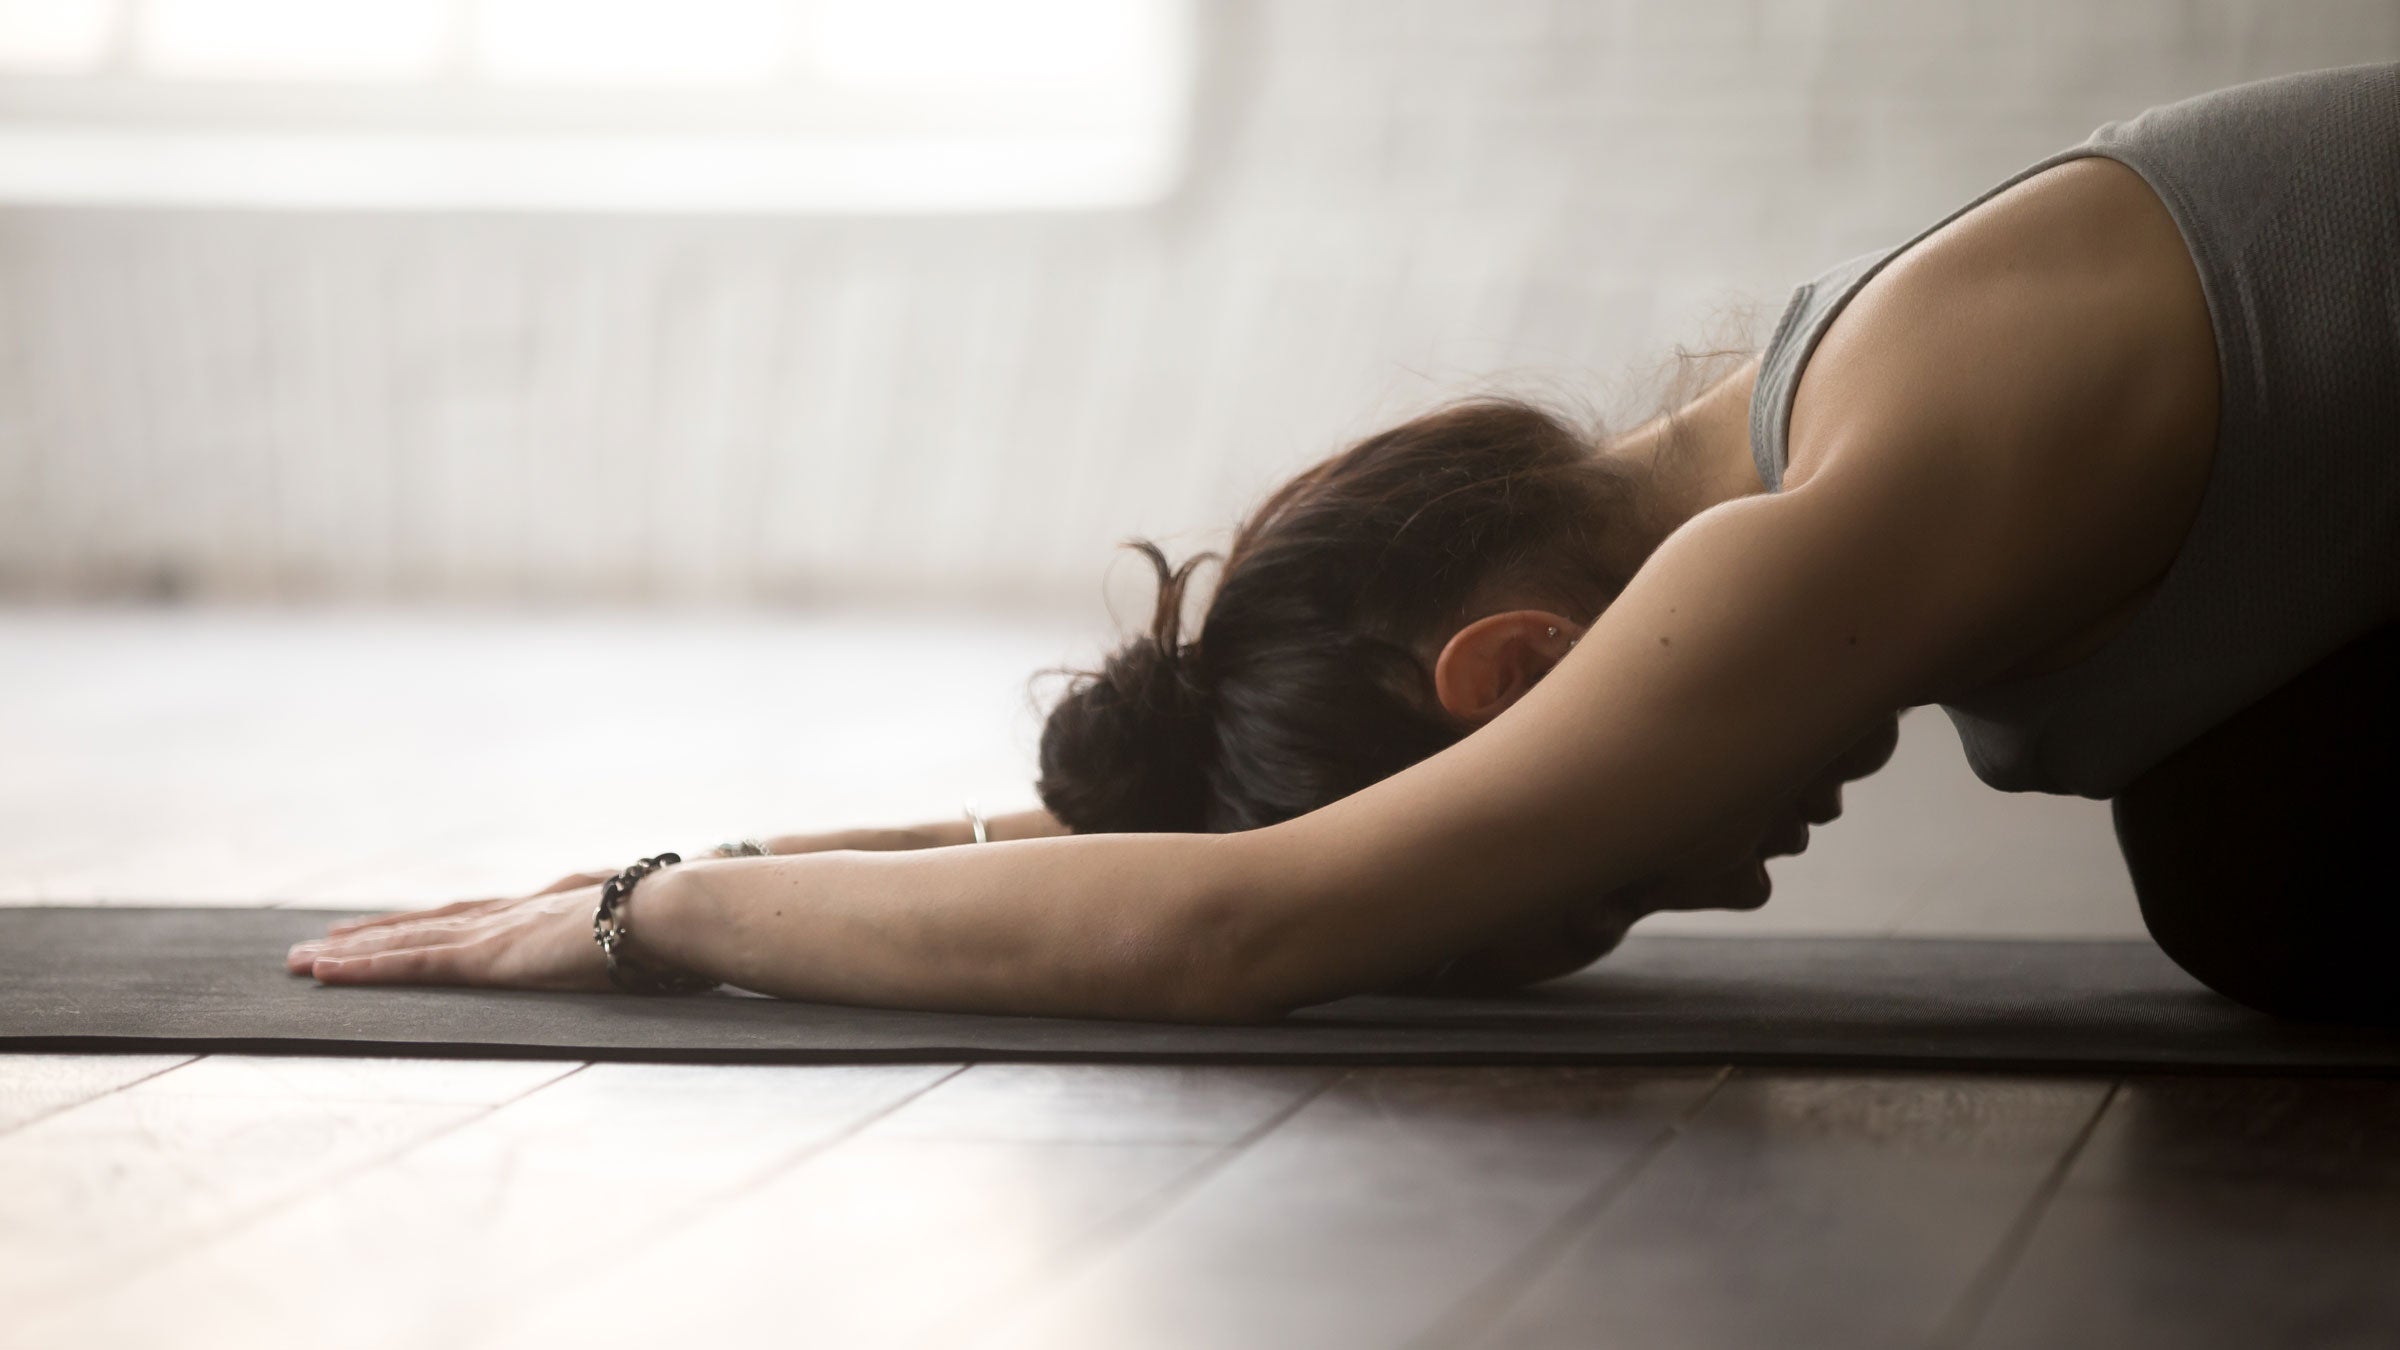 A One-Strap Restorative Yoga Sequence for Self-Care